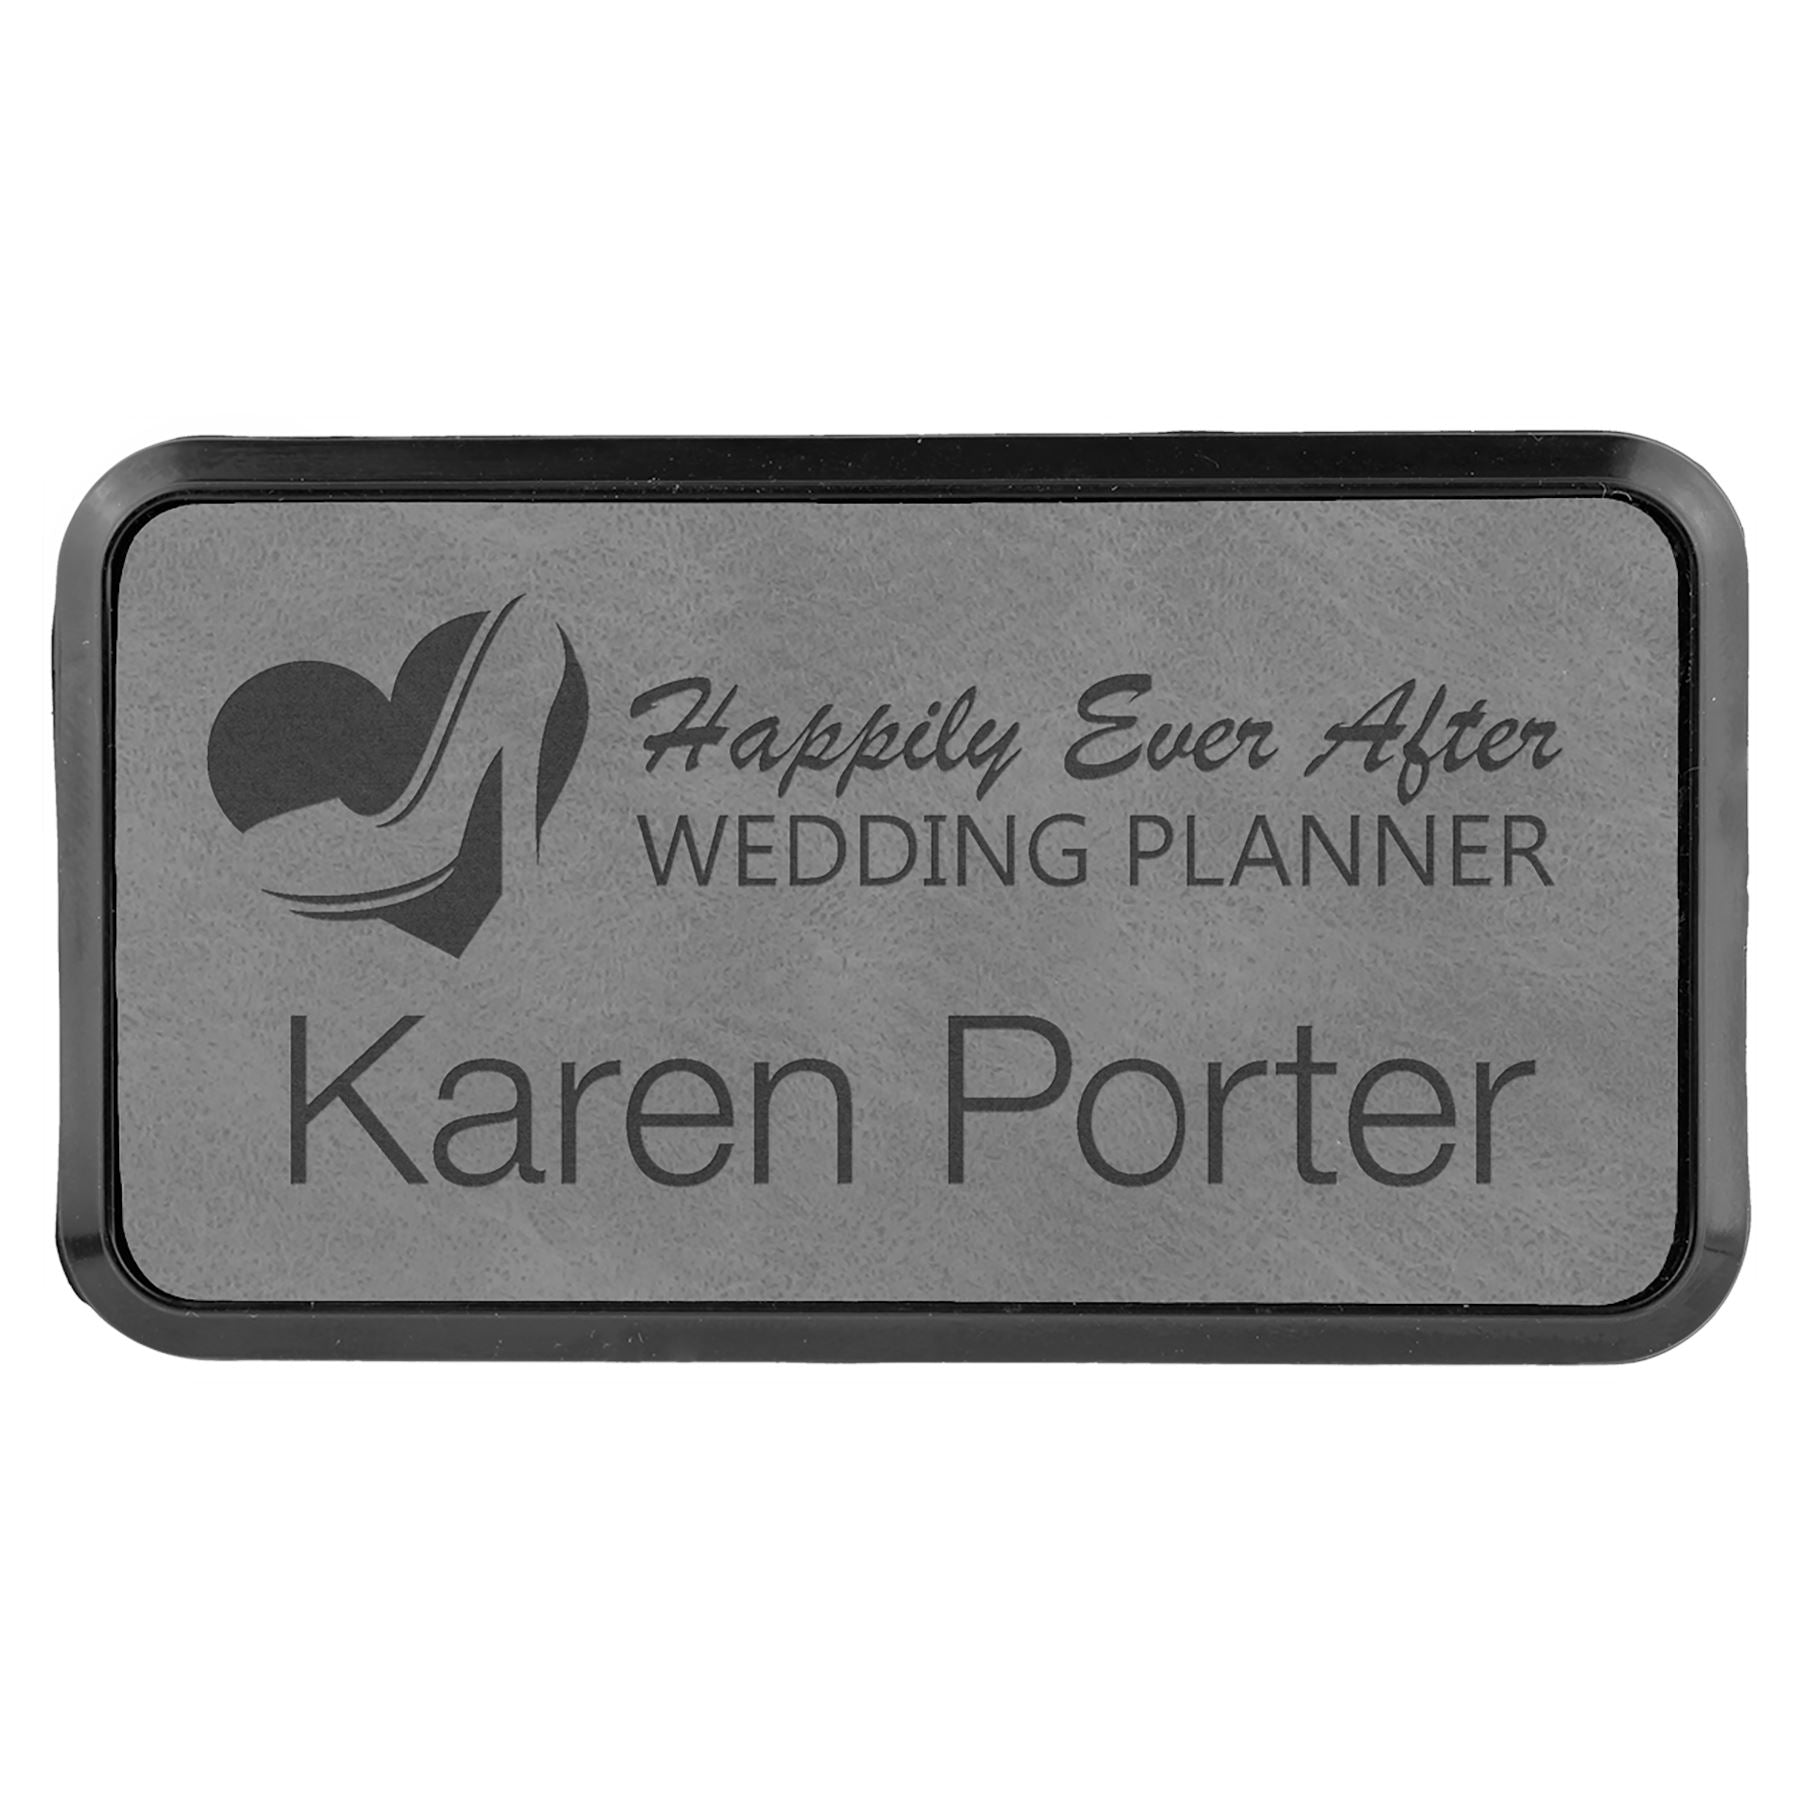 Rectangle Badge w/Frame, Laserable Leatherette 3 1/2" x 1 1/2" Name Badge Craftworks NW Gray/Black 